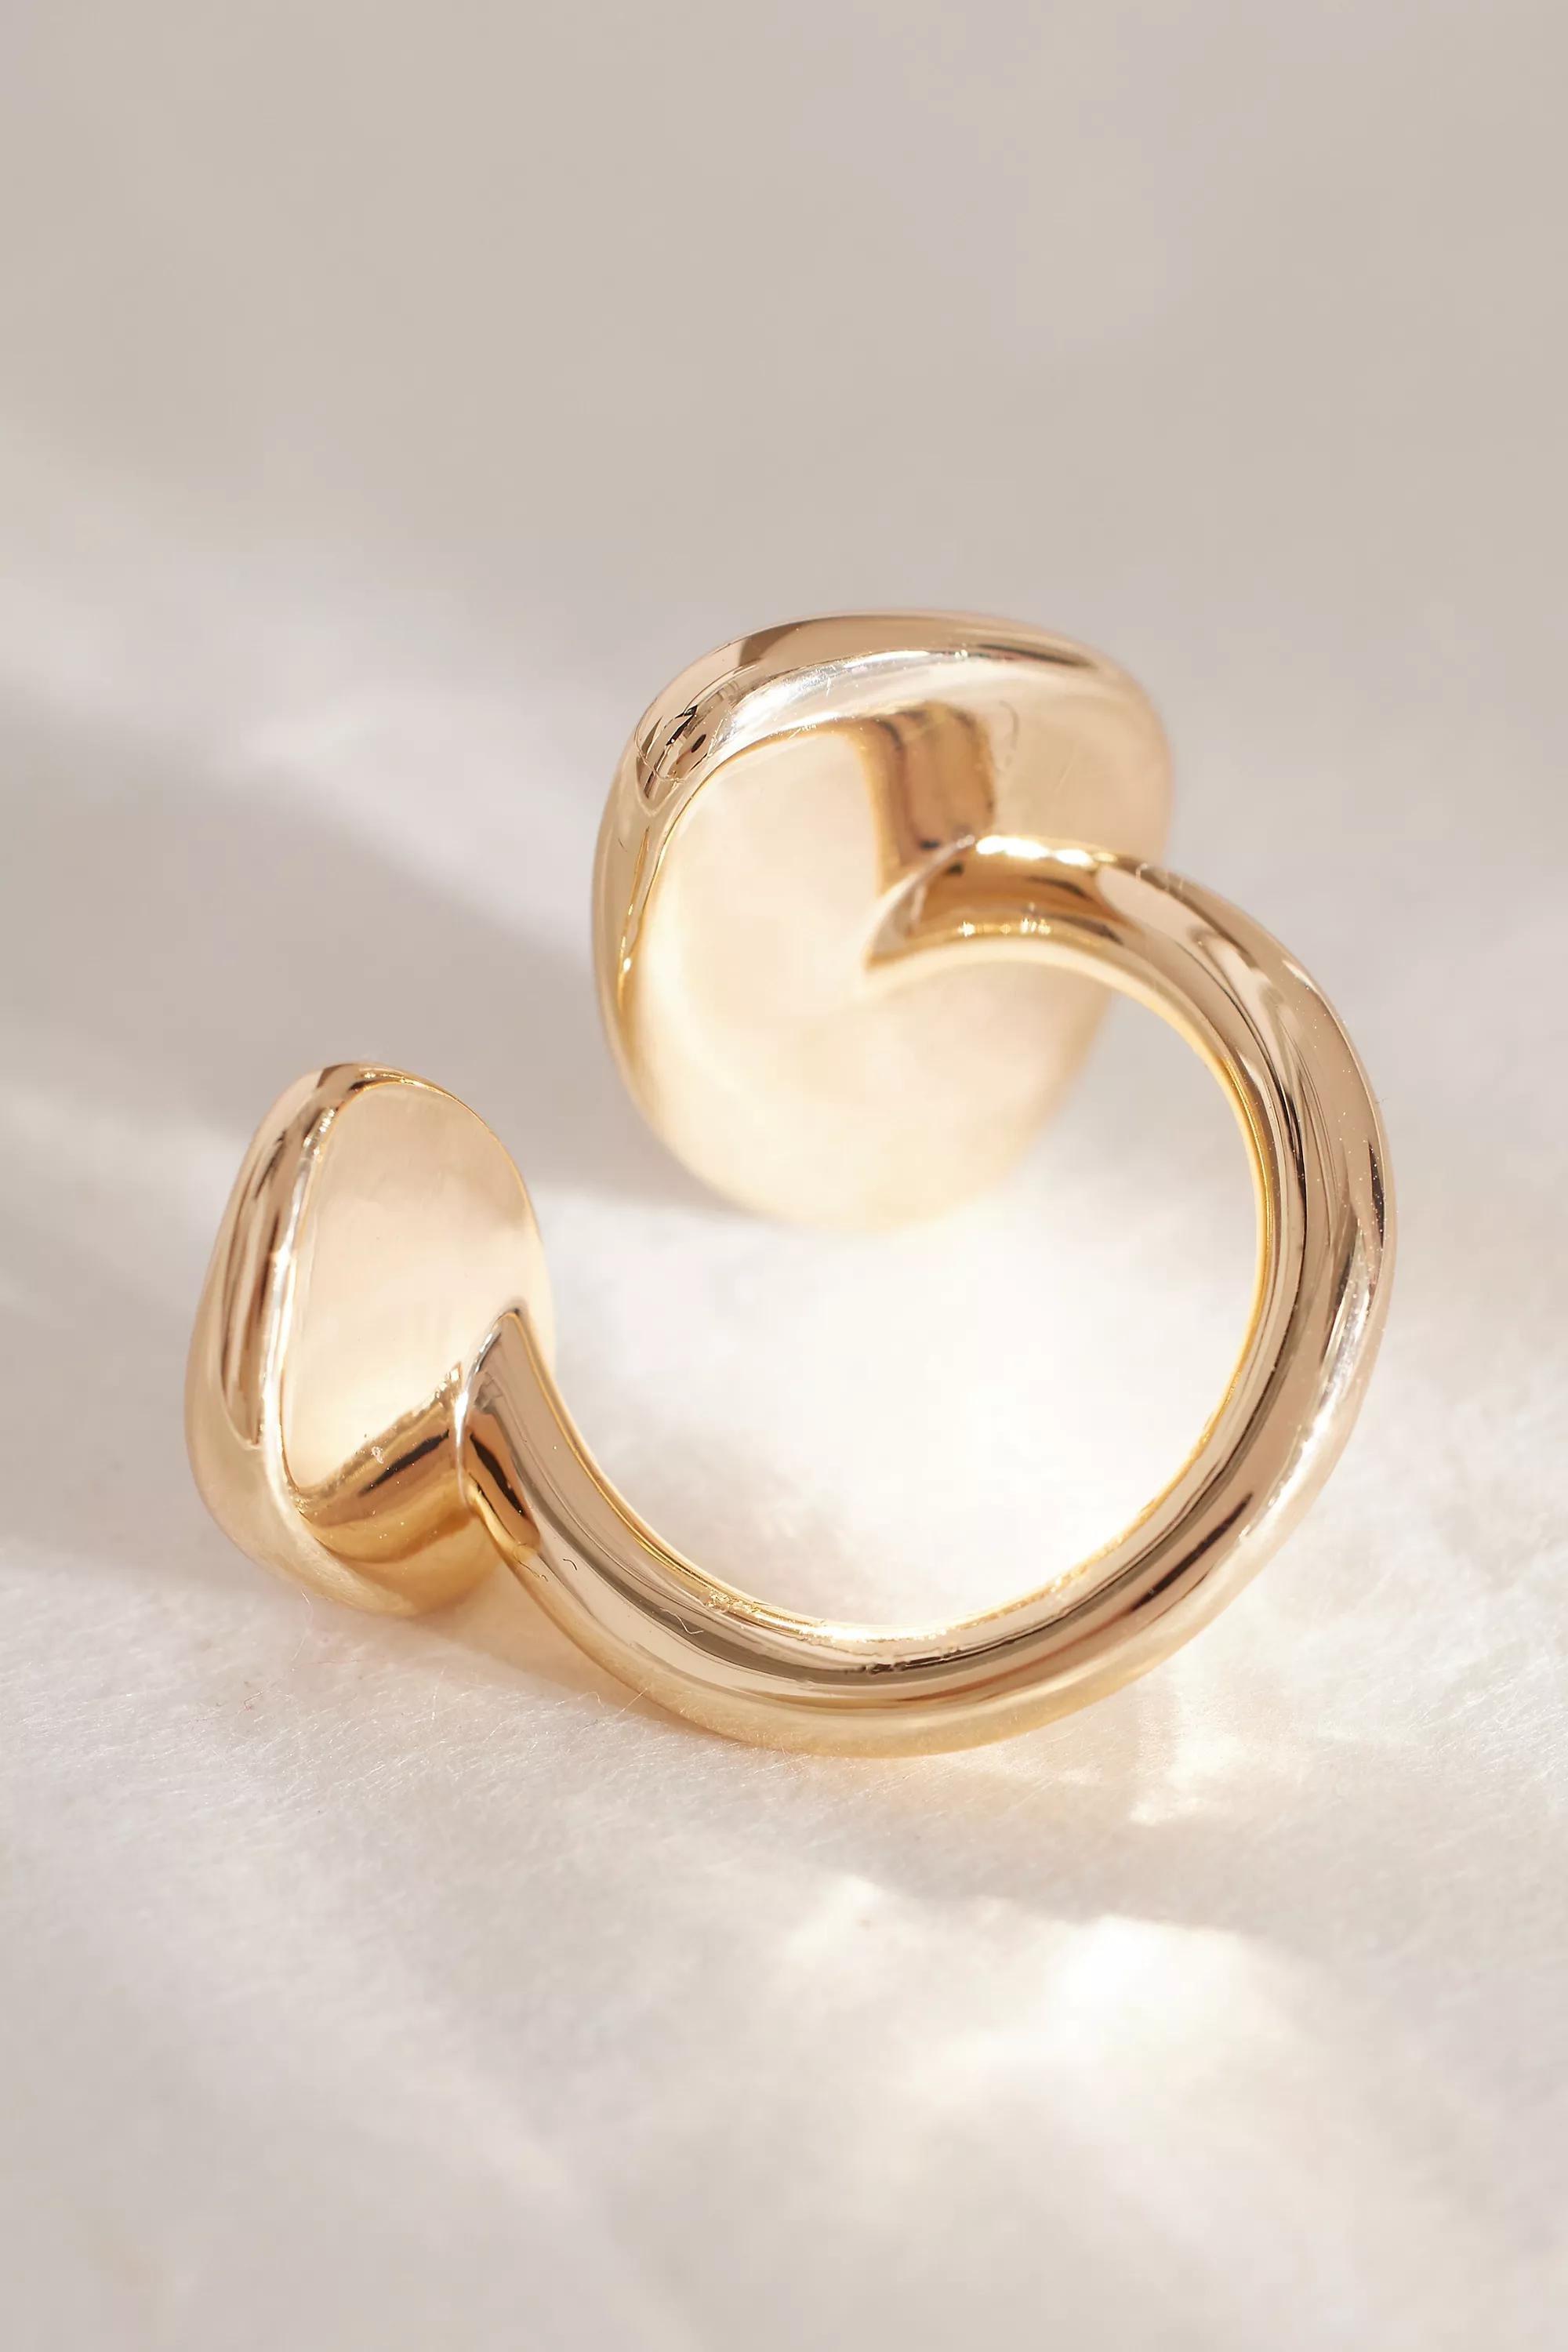 Anthropologie - Oversized Double-Pebble Adjustable Ring, Gold